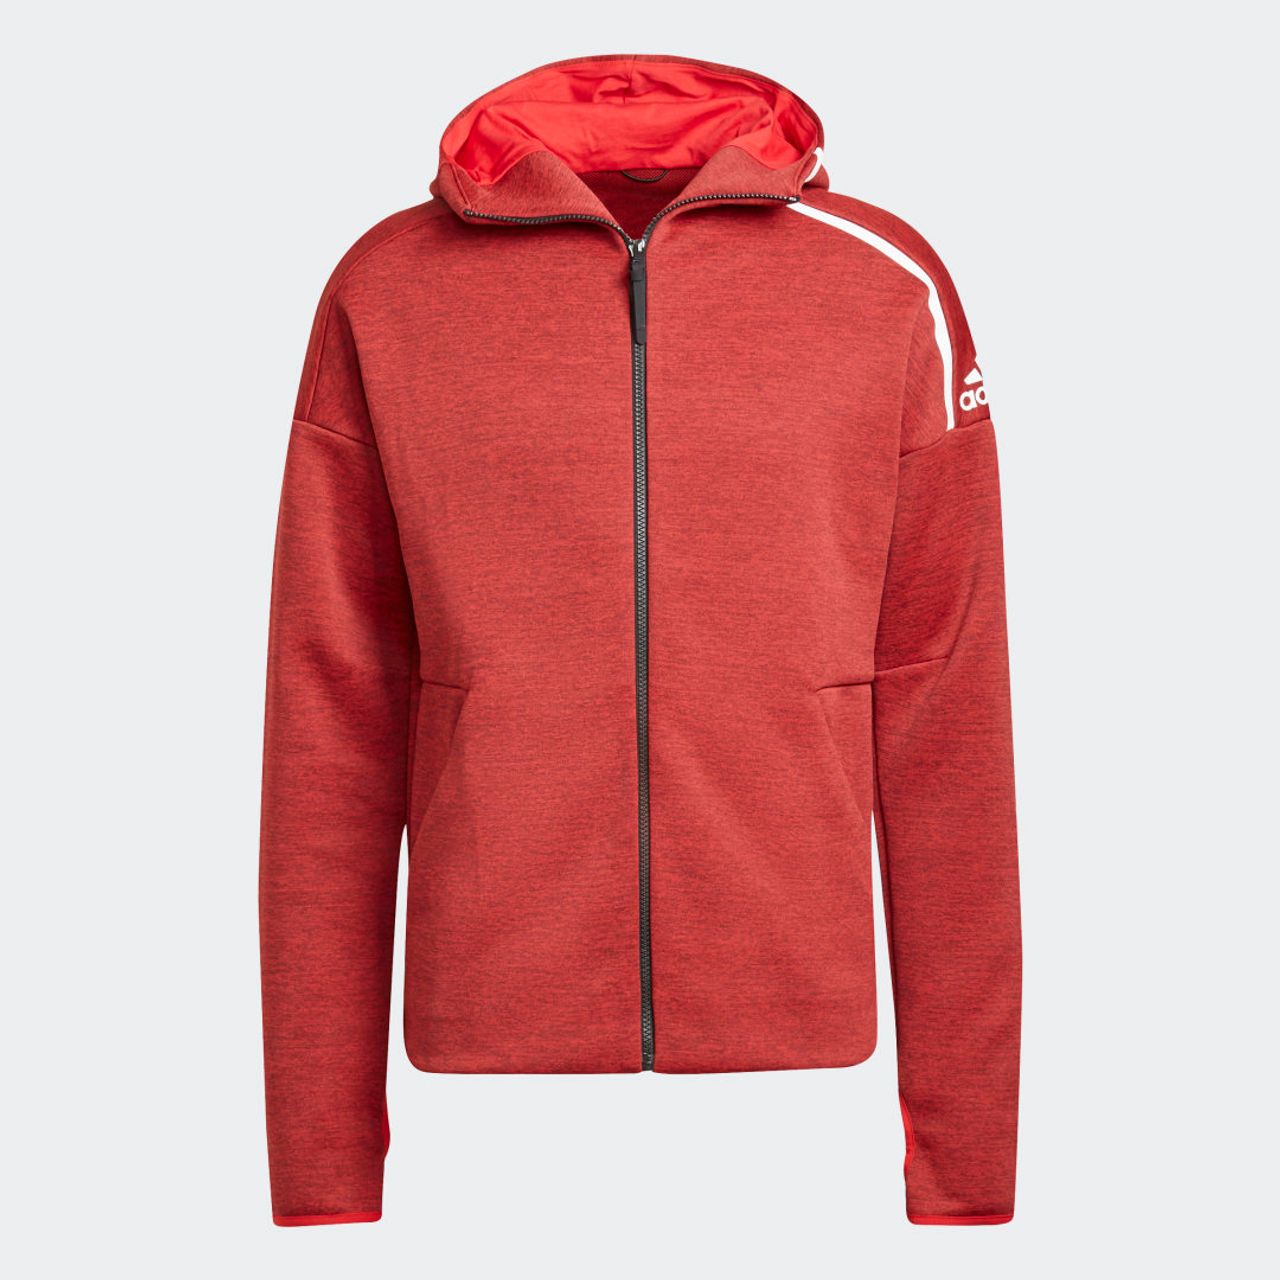 Adidas Z N E Hoodie Featuring Fast Release Zipper Gt2509 Compare Prices